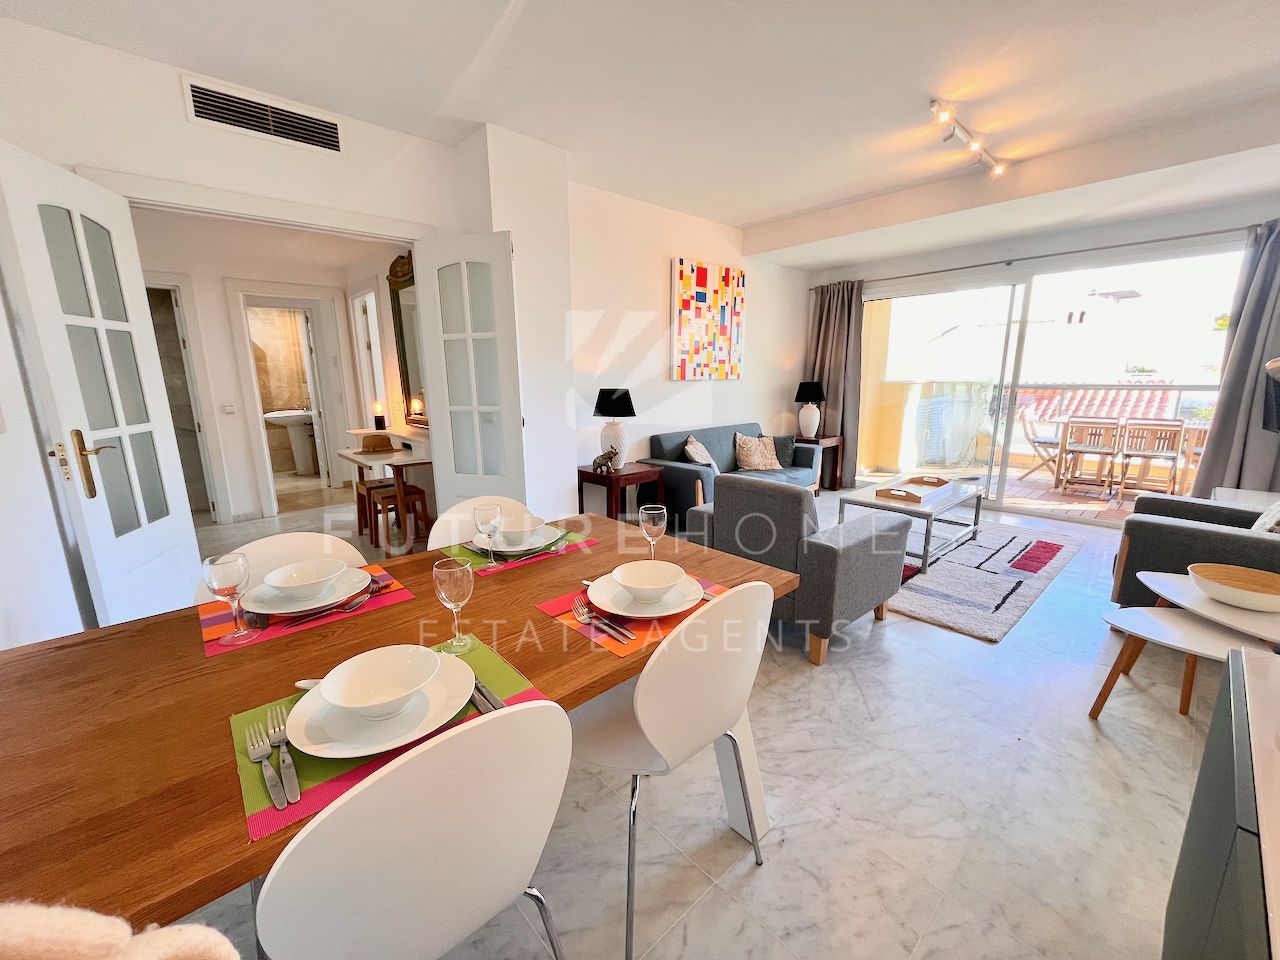 Immaculate apartment within frontline beach community overlooking Cristo Beach in Estepona